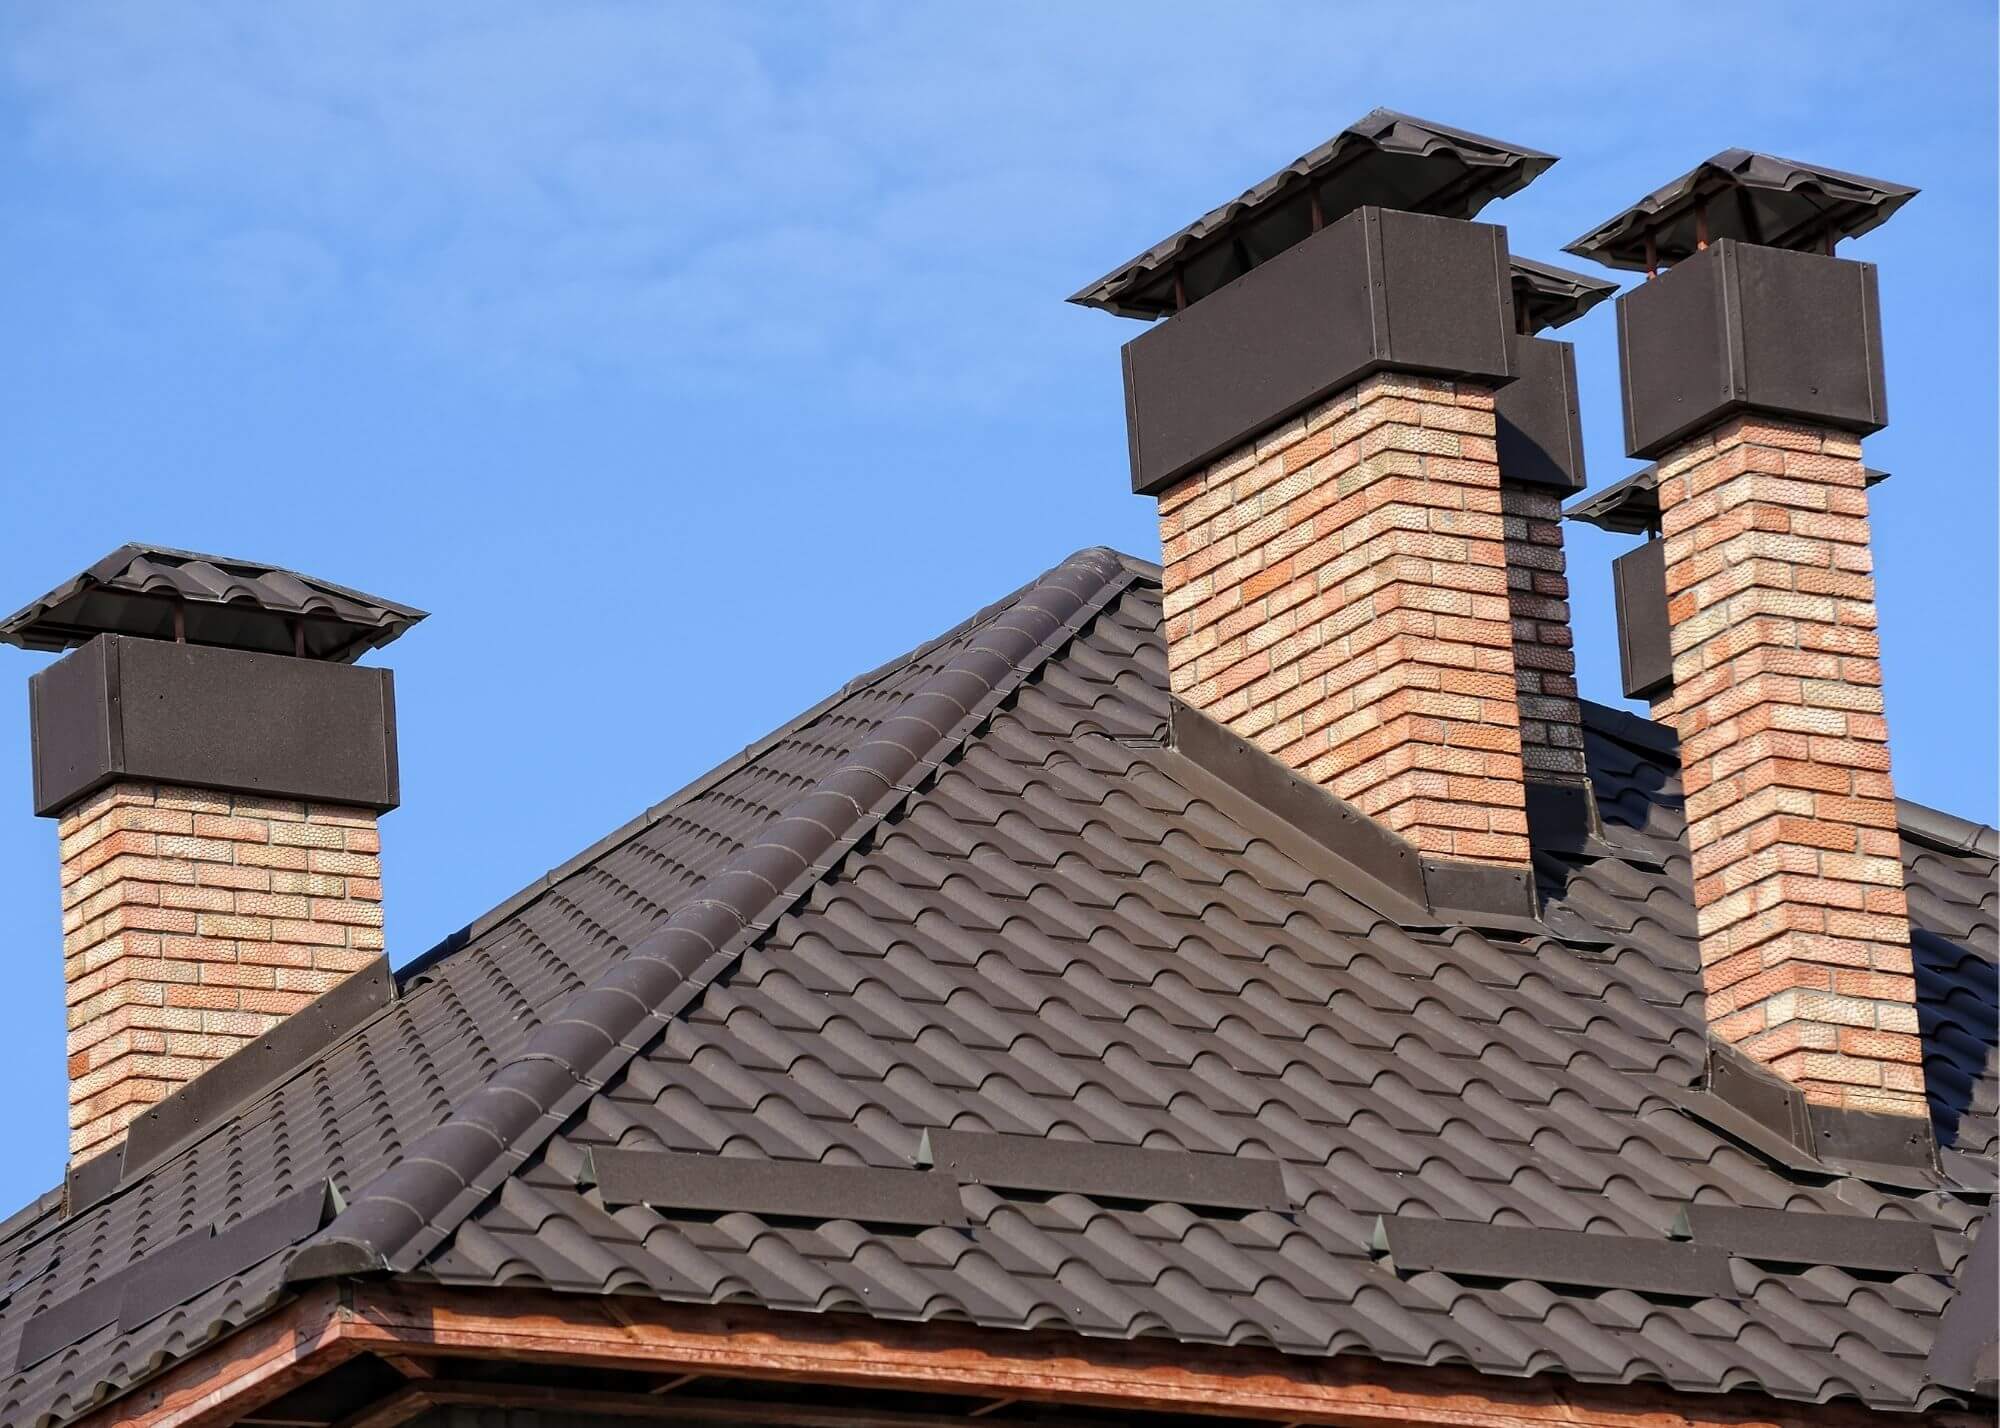 New Roofs | The Akron Roofers | Akron, Ohio's #1 Choice for Roofing